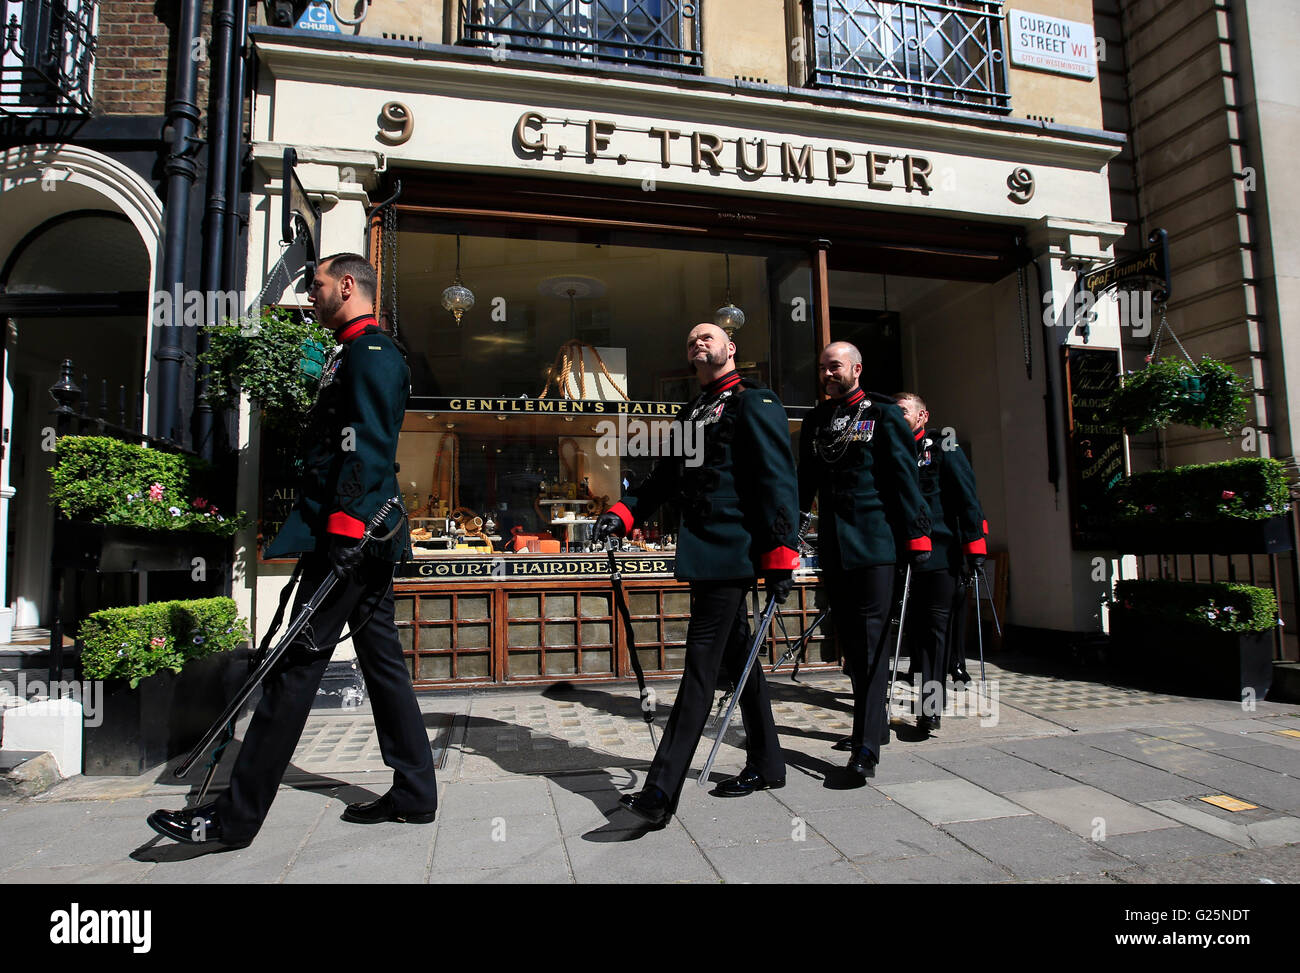 Buglers from the Massed Bands and Bugles of the Rifles walk onto Curzon Street following having their beards trimmed and shaped at G.F. Trumper in Mayfair ahead of performing at Horse Guards Parade on June 1 and 2. Stock Photo